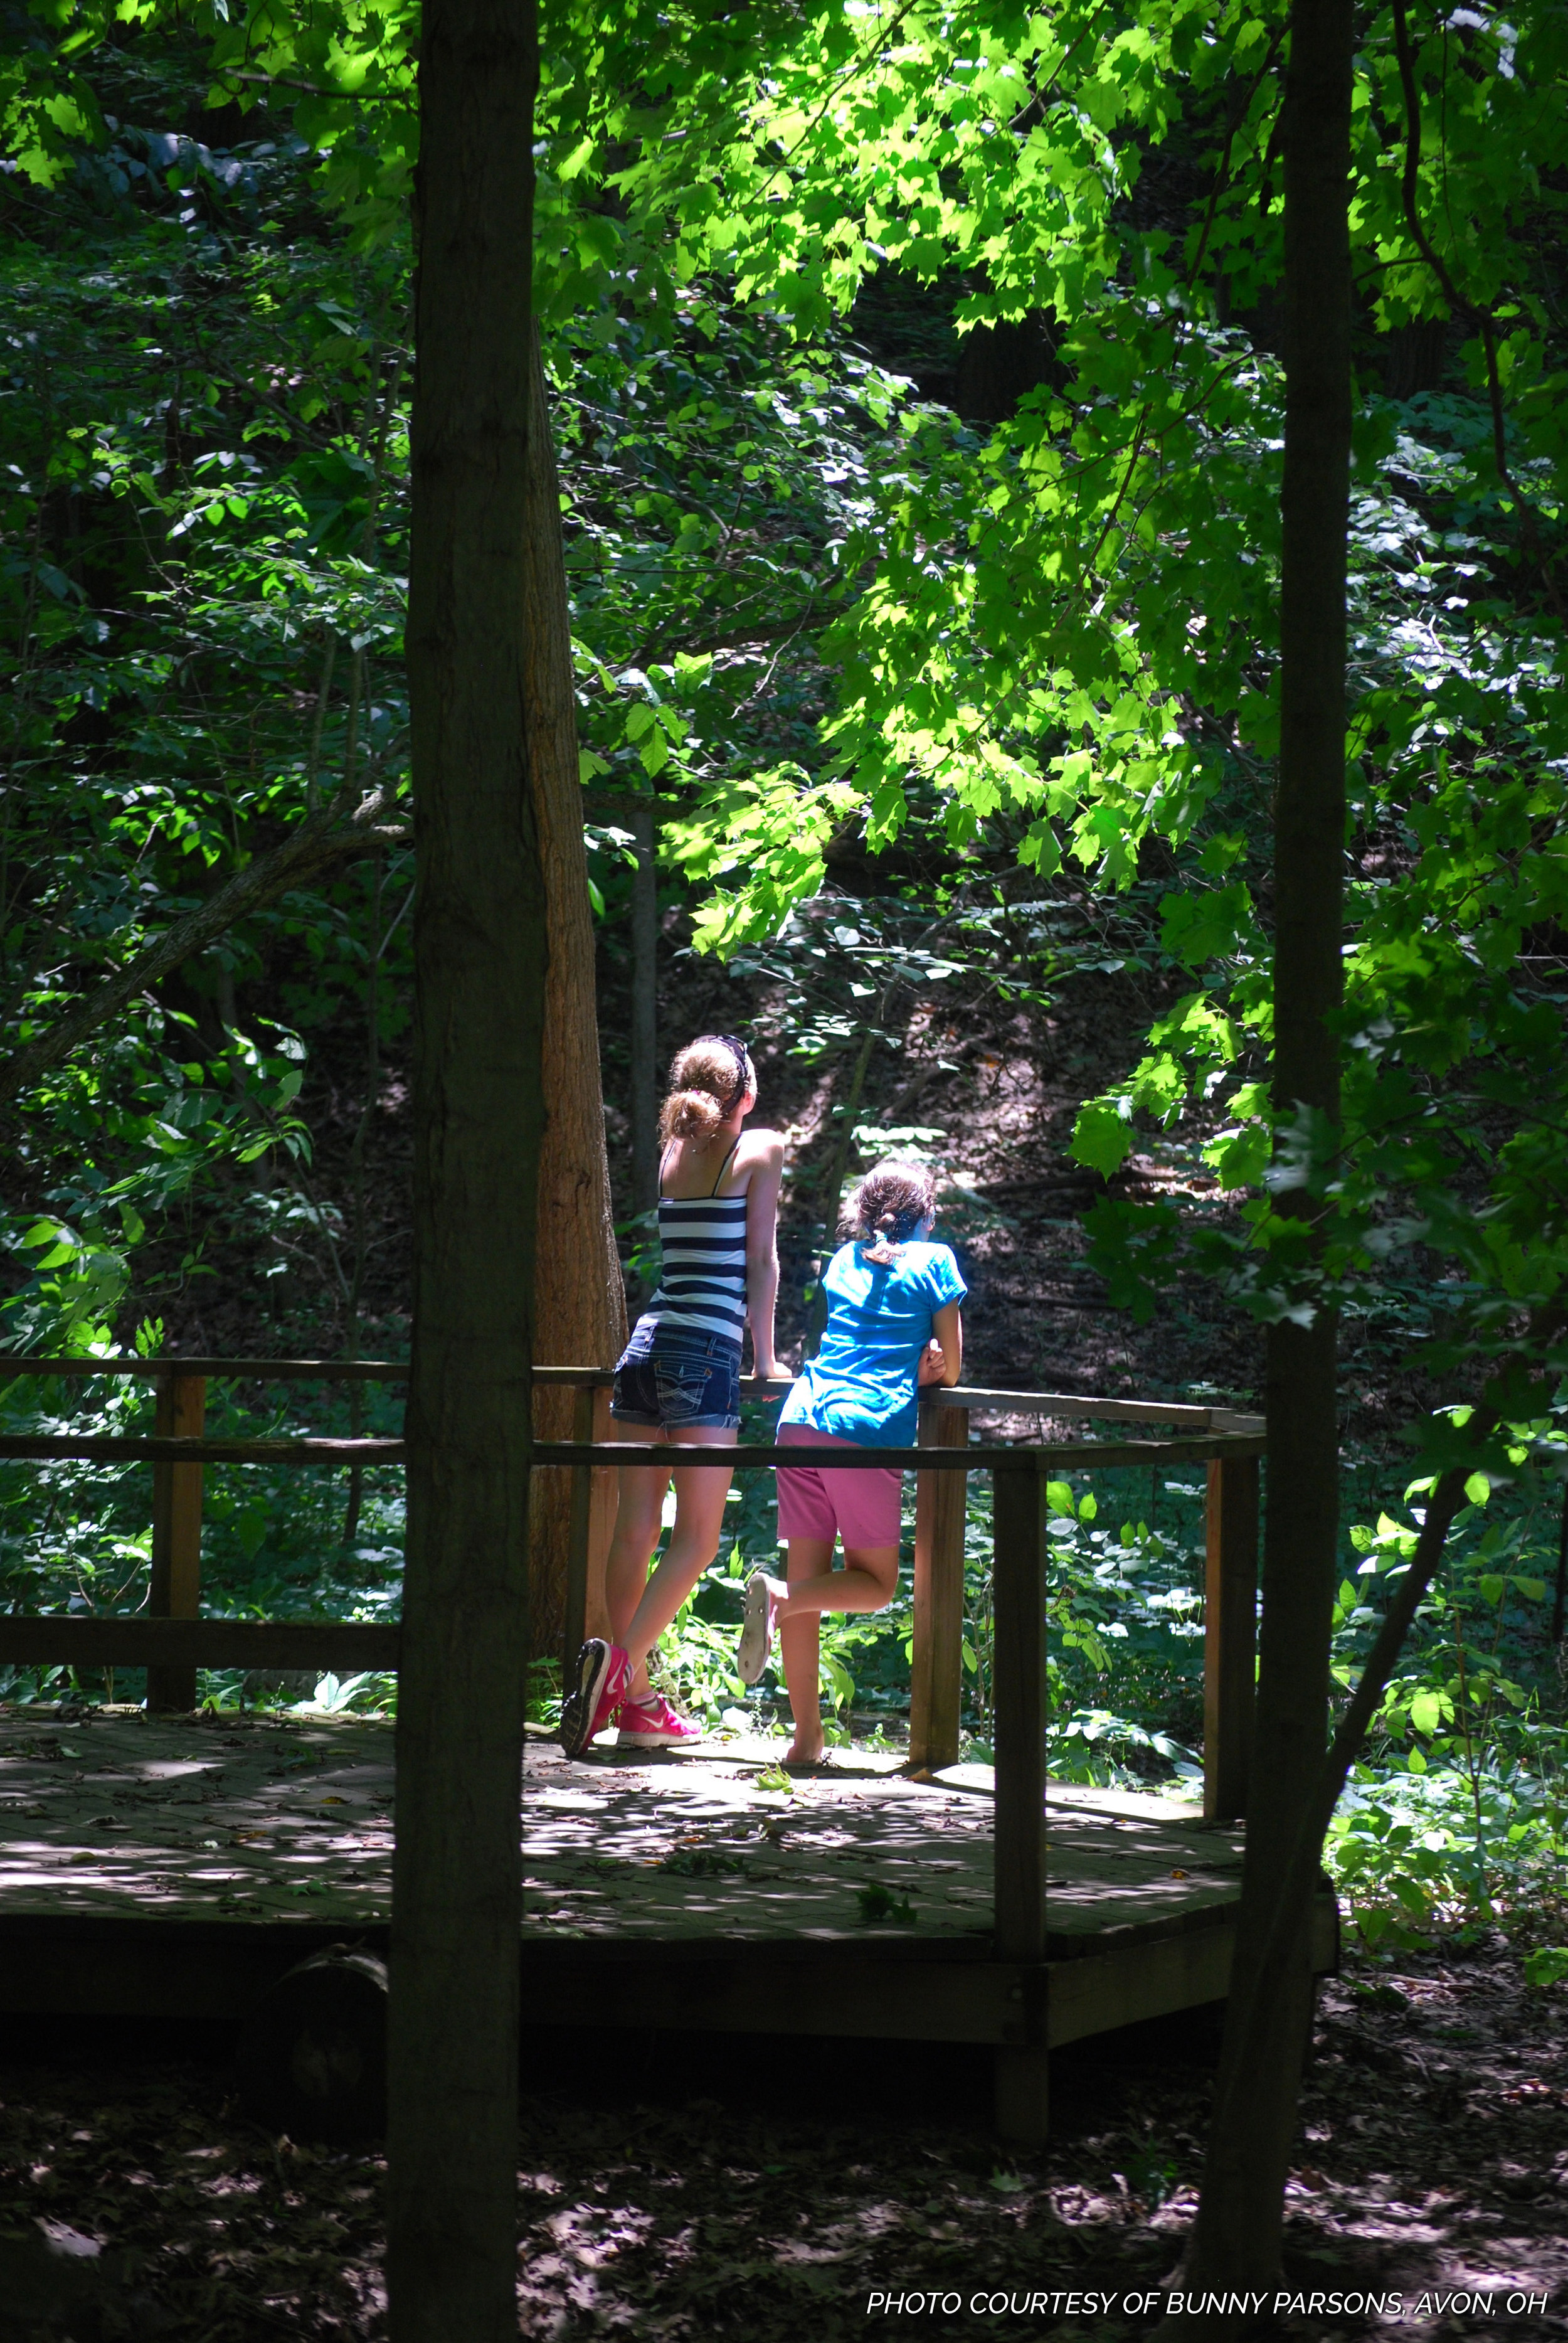 Children admiring nature on the Big Woods Trail